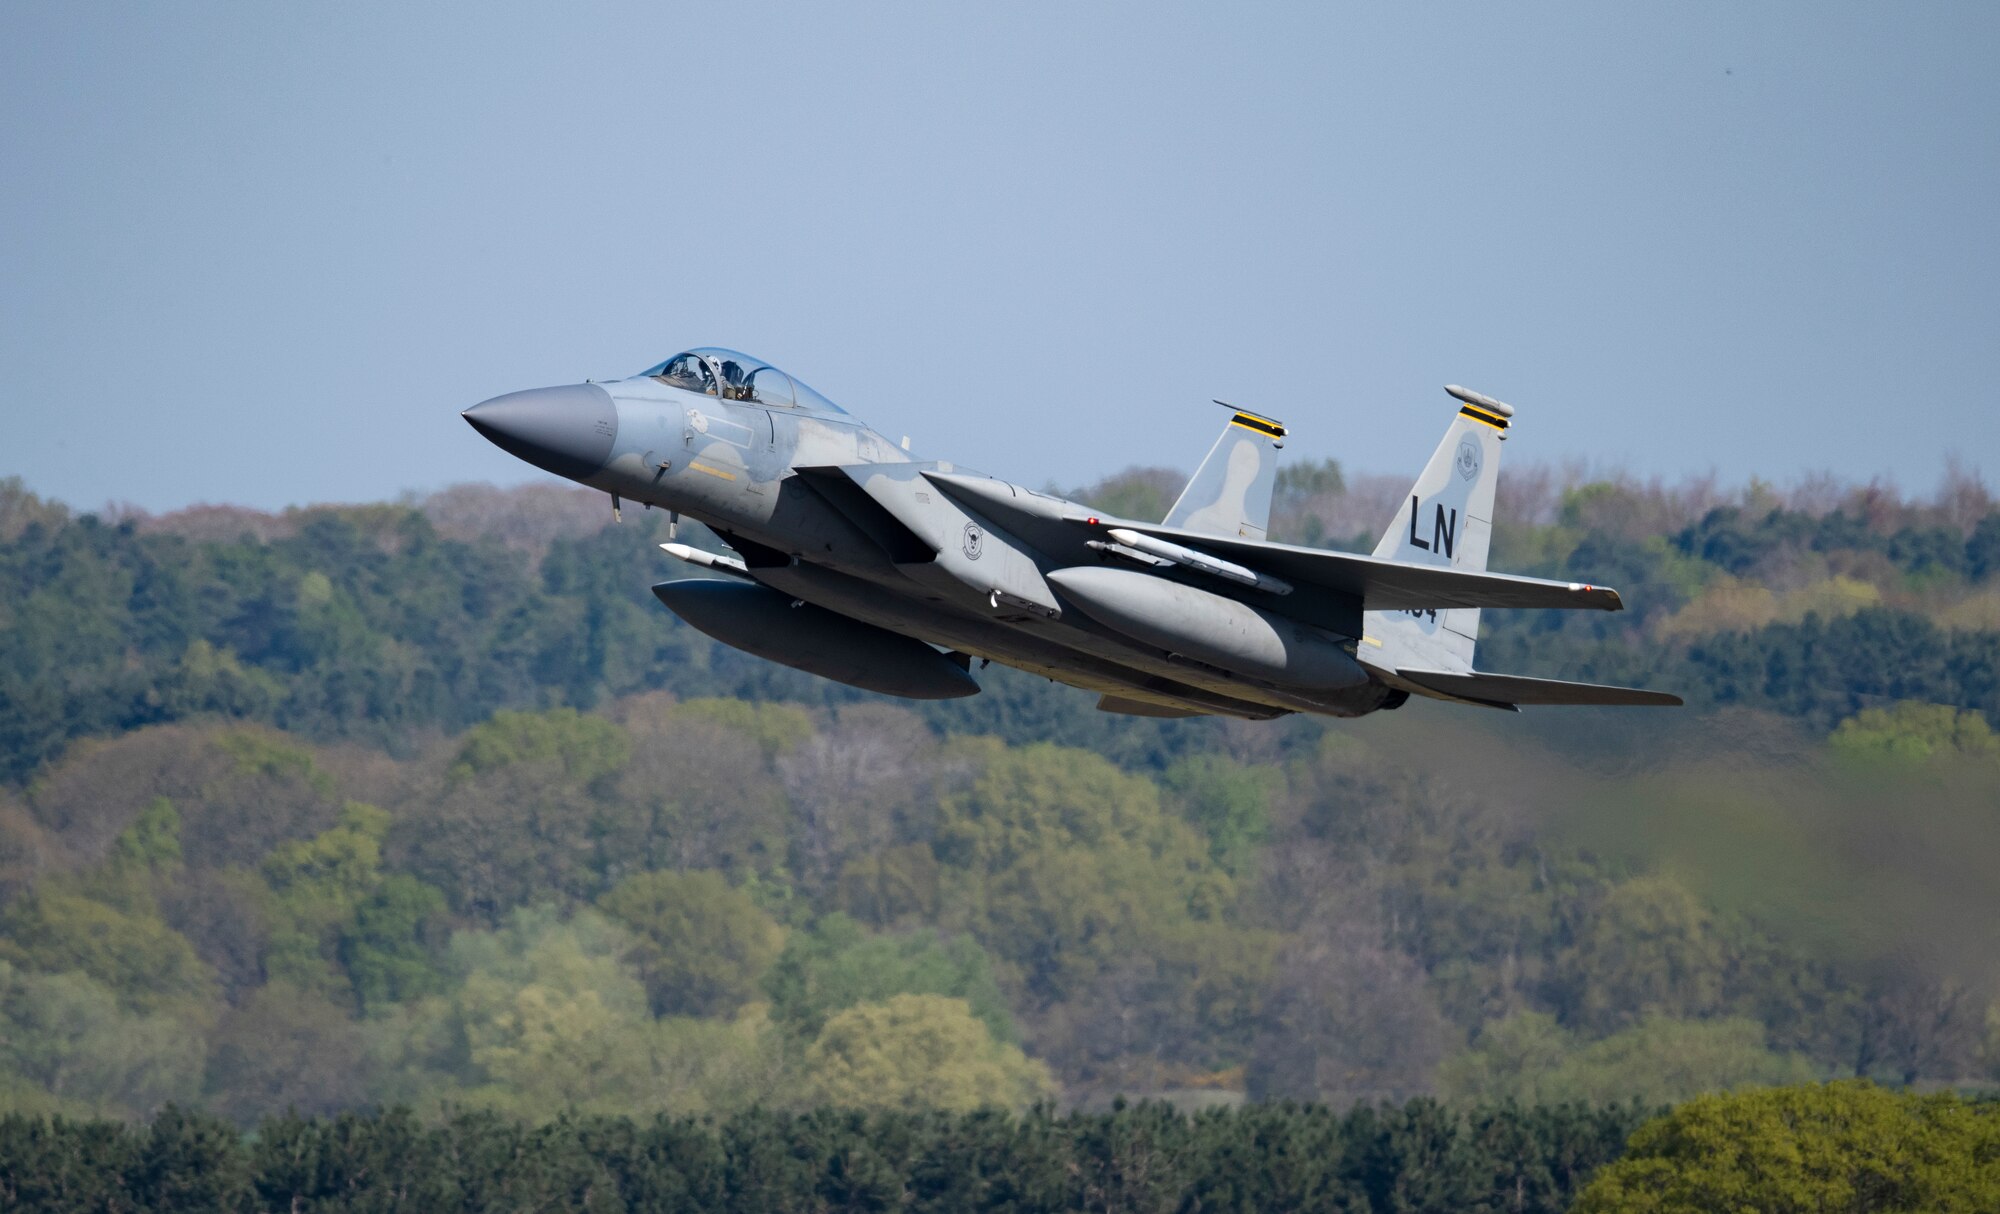 An F-15C Eagle assigned to the 493rd Fighter Squadron takes off for a training sortie from Royal Air Force Lakenheath, England, April 15, 2020. The Eagle is an all-weather, extremely maneuverable, tactical fighter designed to gain and maintain air supremacy over the battlefield. (U.S. Air Force photo by Airman 1st Class Madeline Herzog)